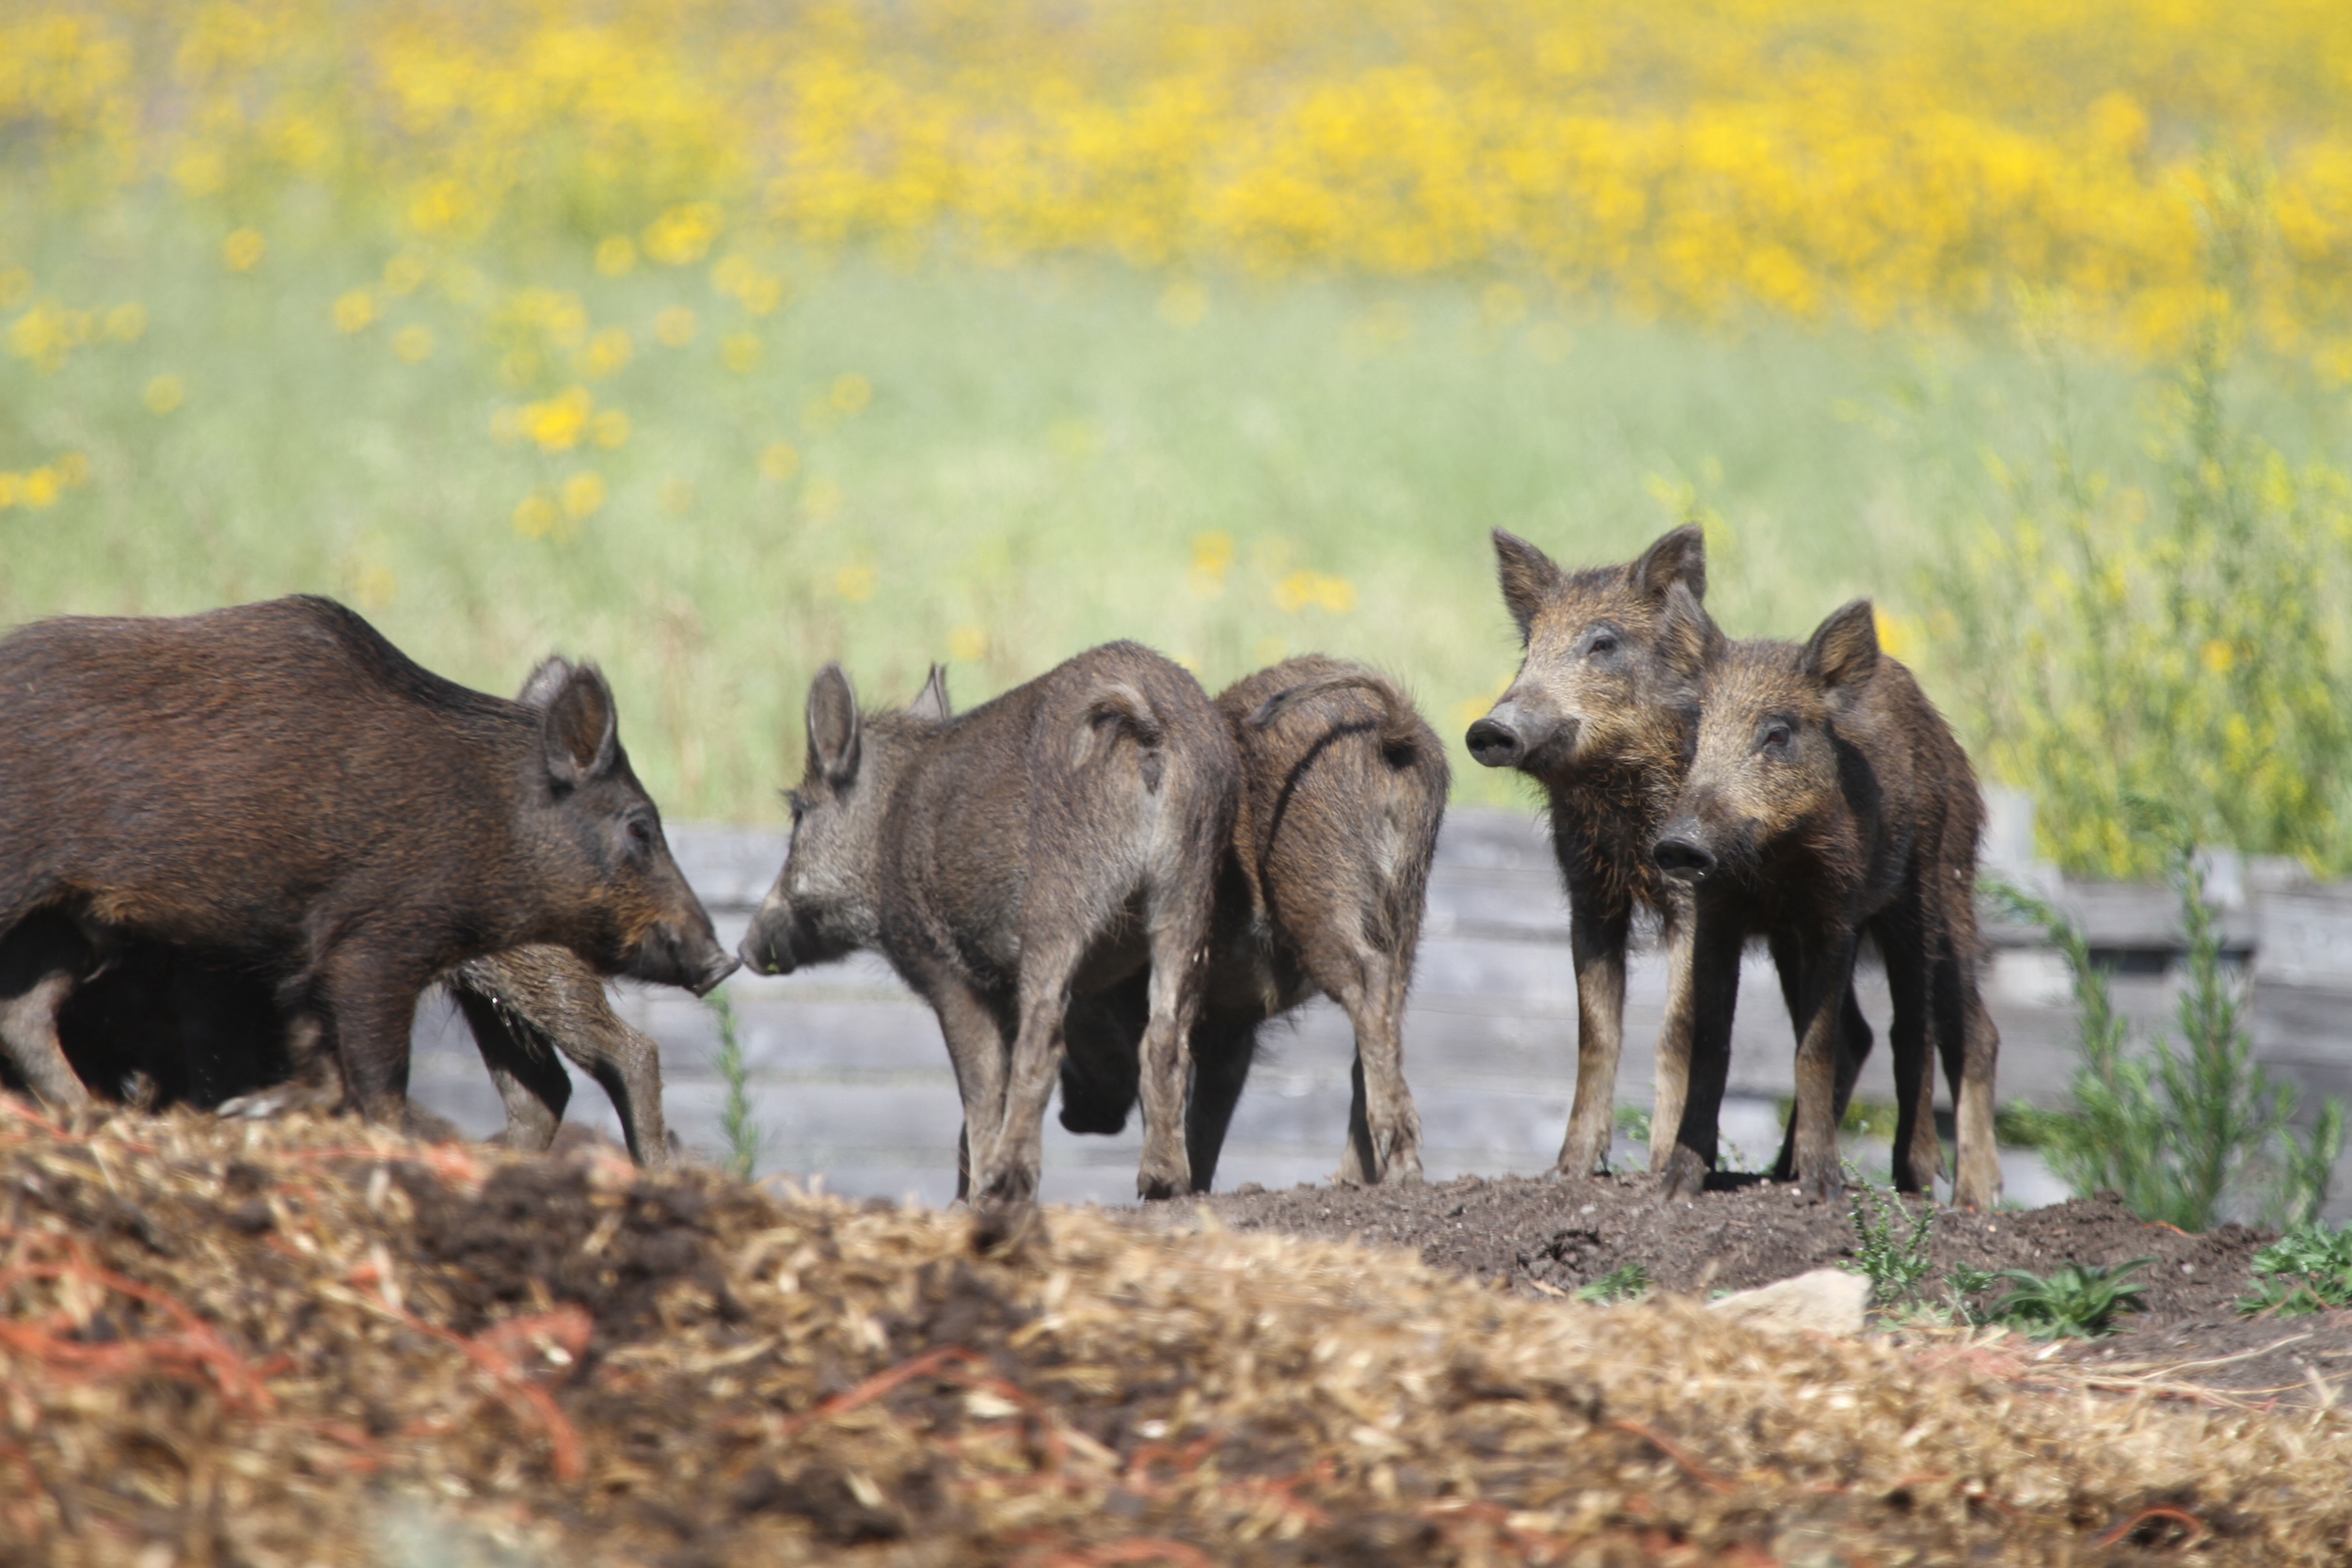 Wild pigs are prolific breeders, with sows producing around six piglets per year, meaning their population grows exponentially. In Canada, the range of wild pigs has been expanding by a staggering nine per cent a year since 1990.